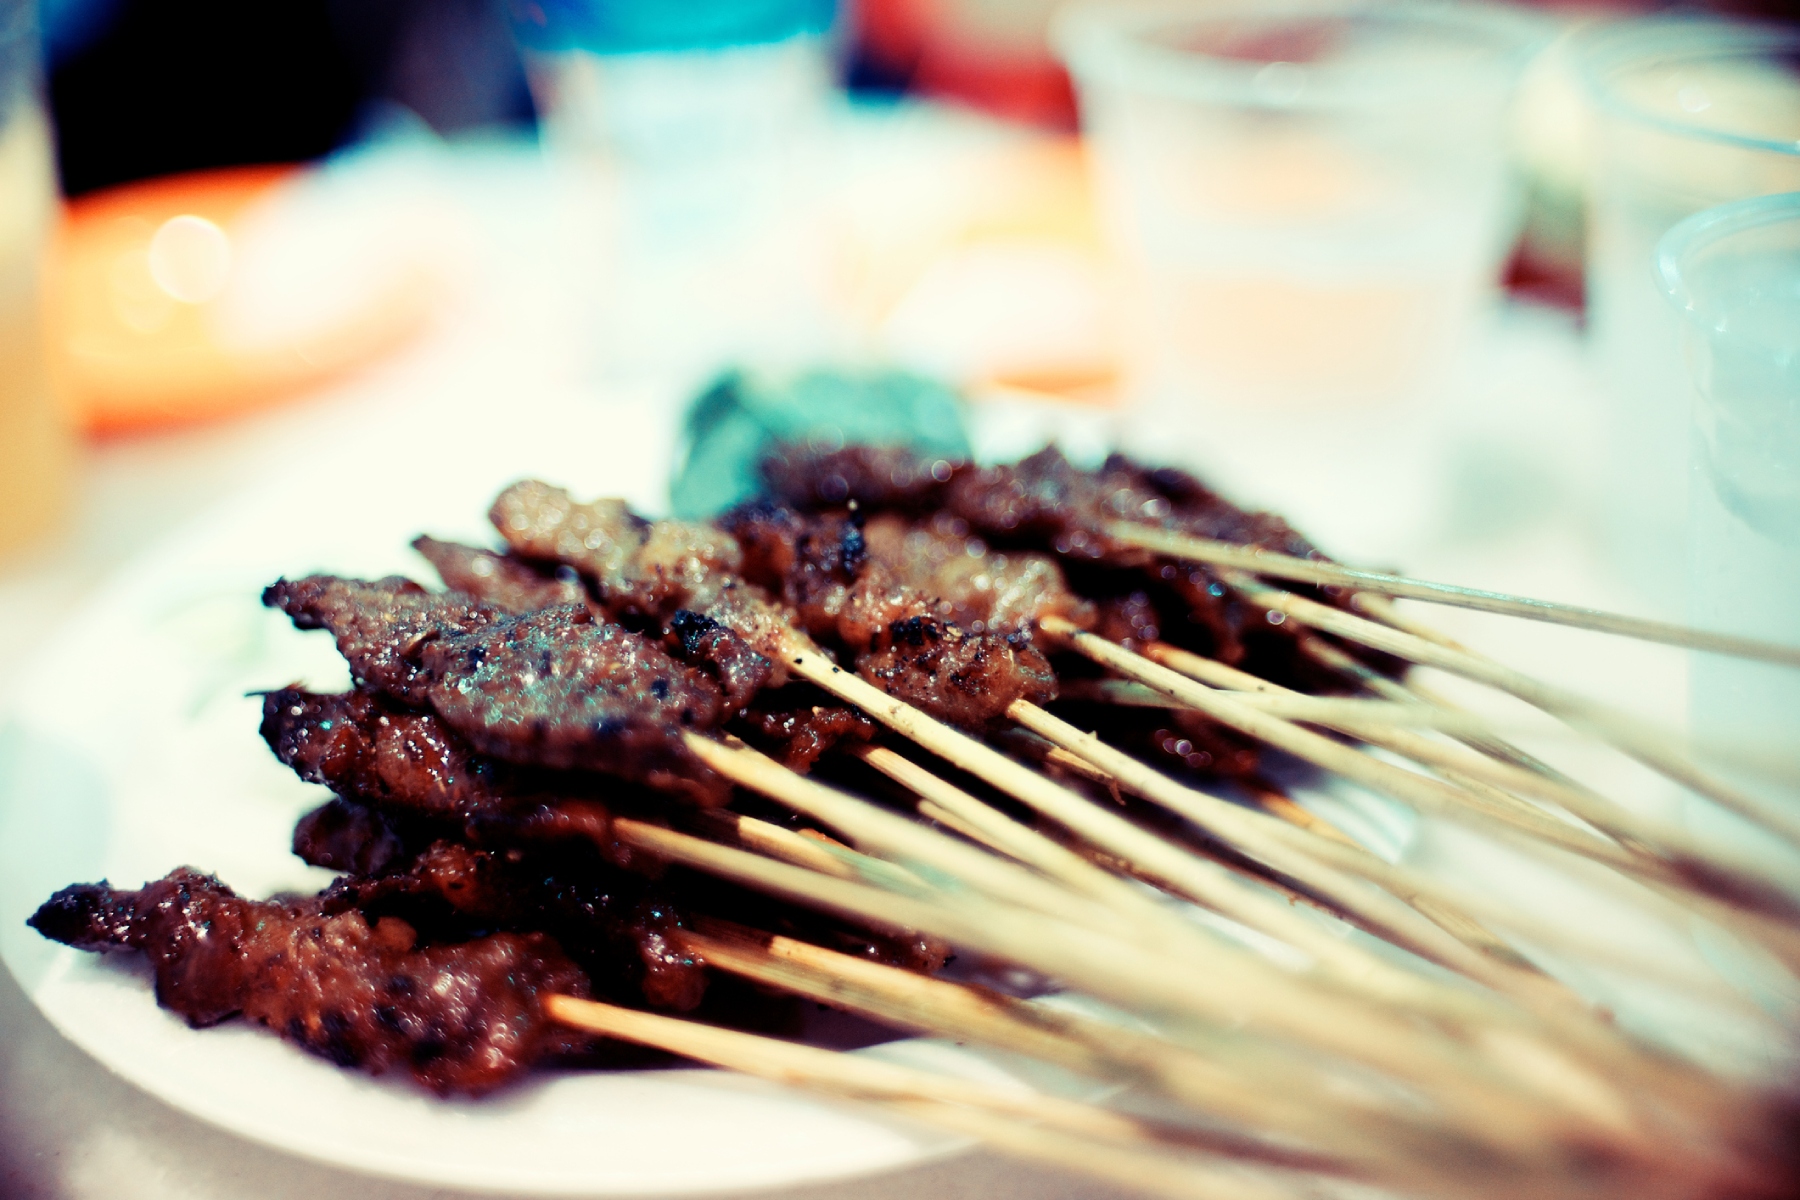 A close-up of a pile of grilled satay spiced meat, served in the famous hawker center in Lau Pa Sat.